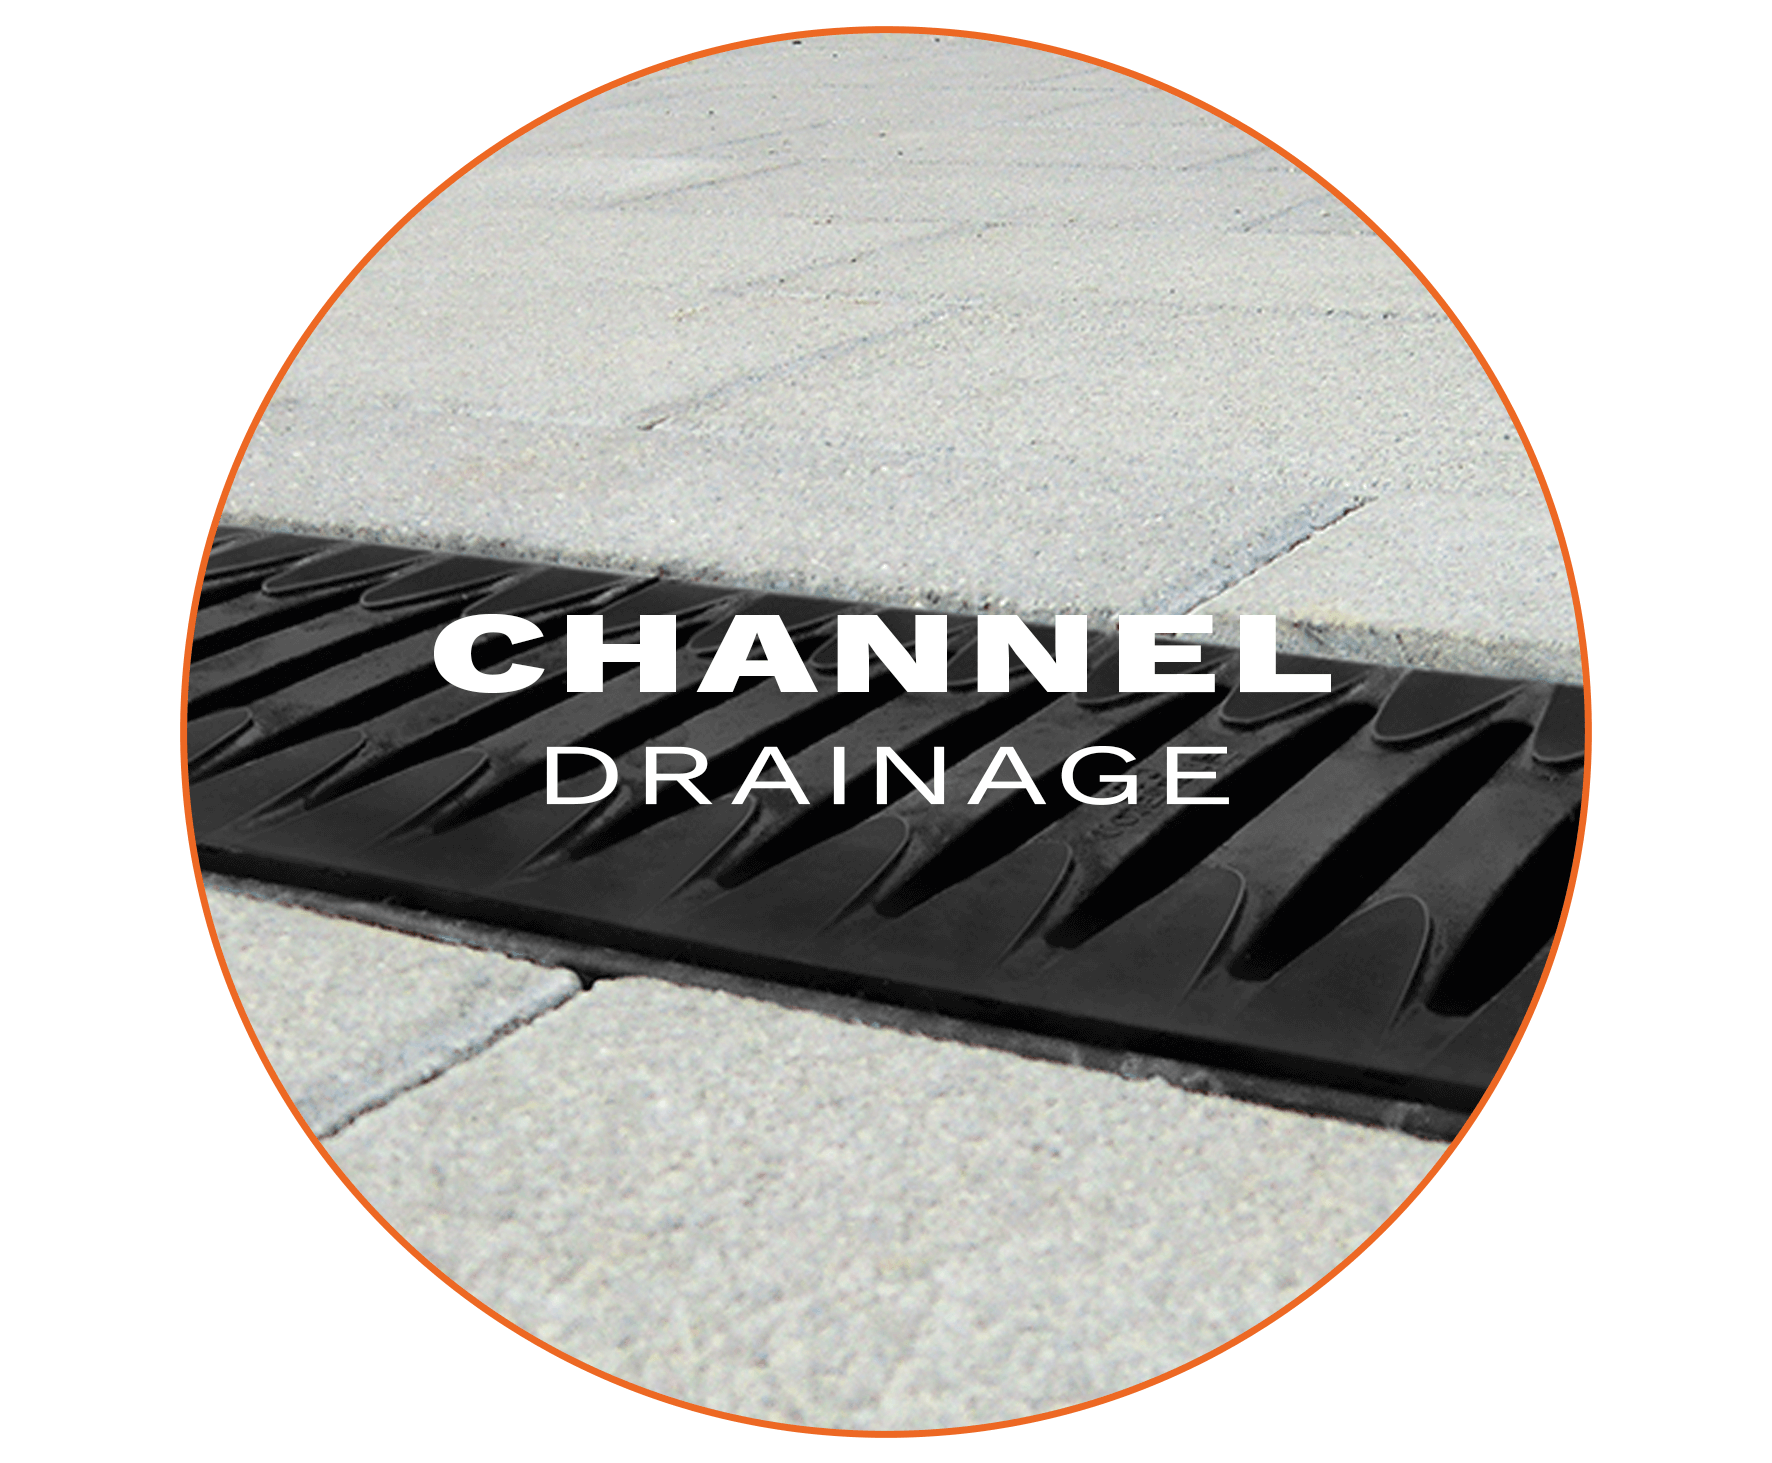 Image of a channel drainage system